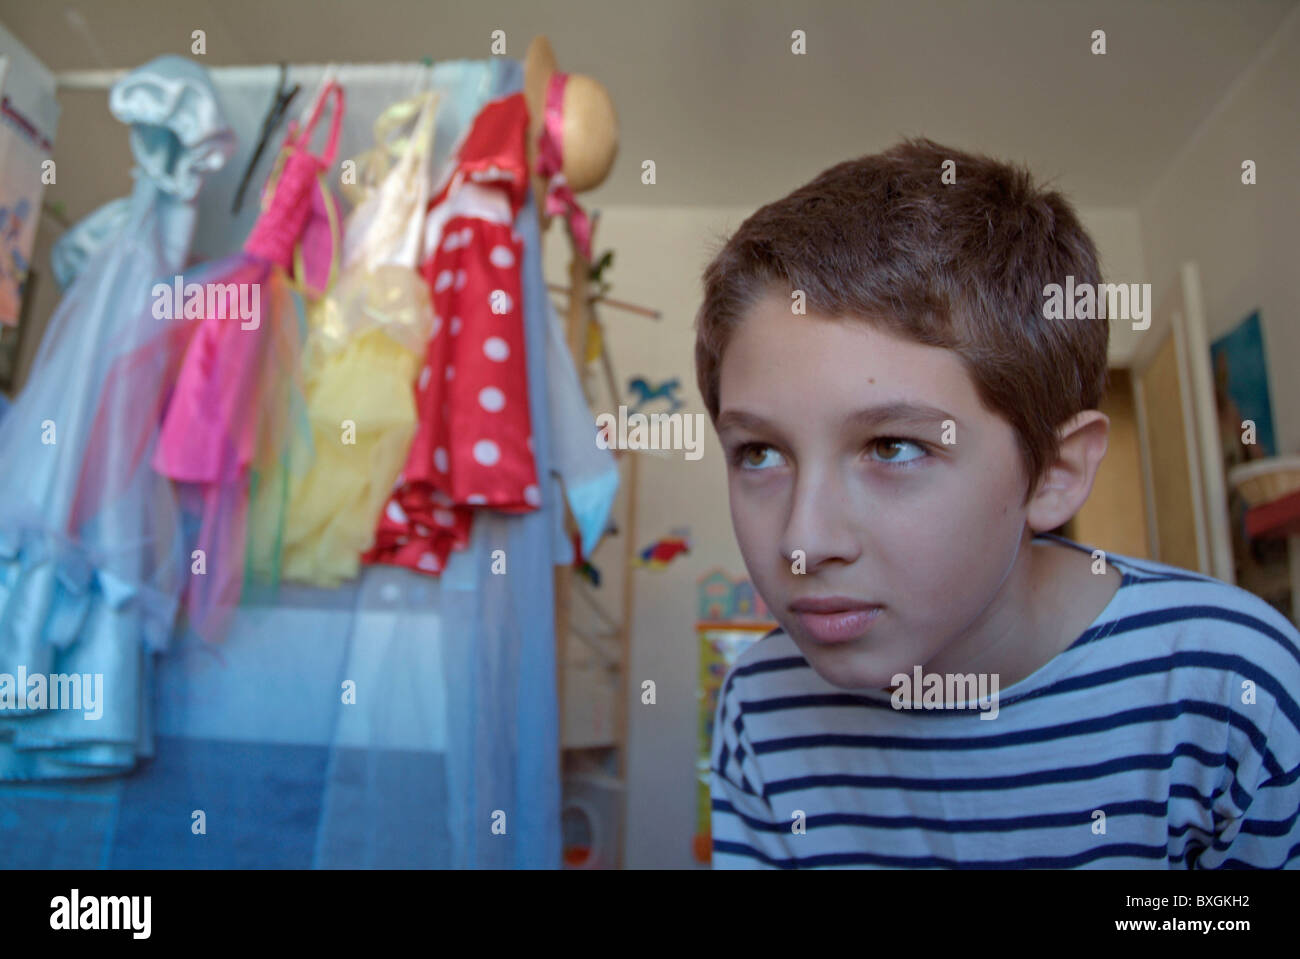 Young boy searching for a toy in his sister's bedroom. Stock Photo